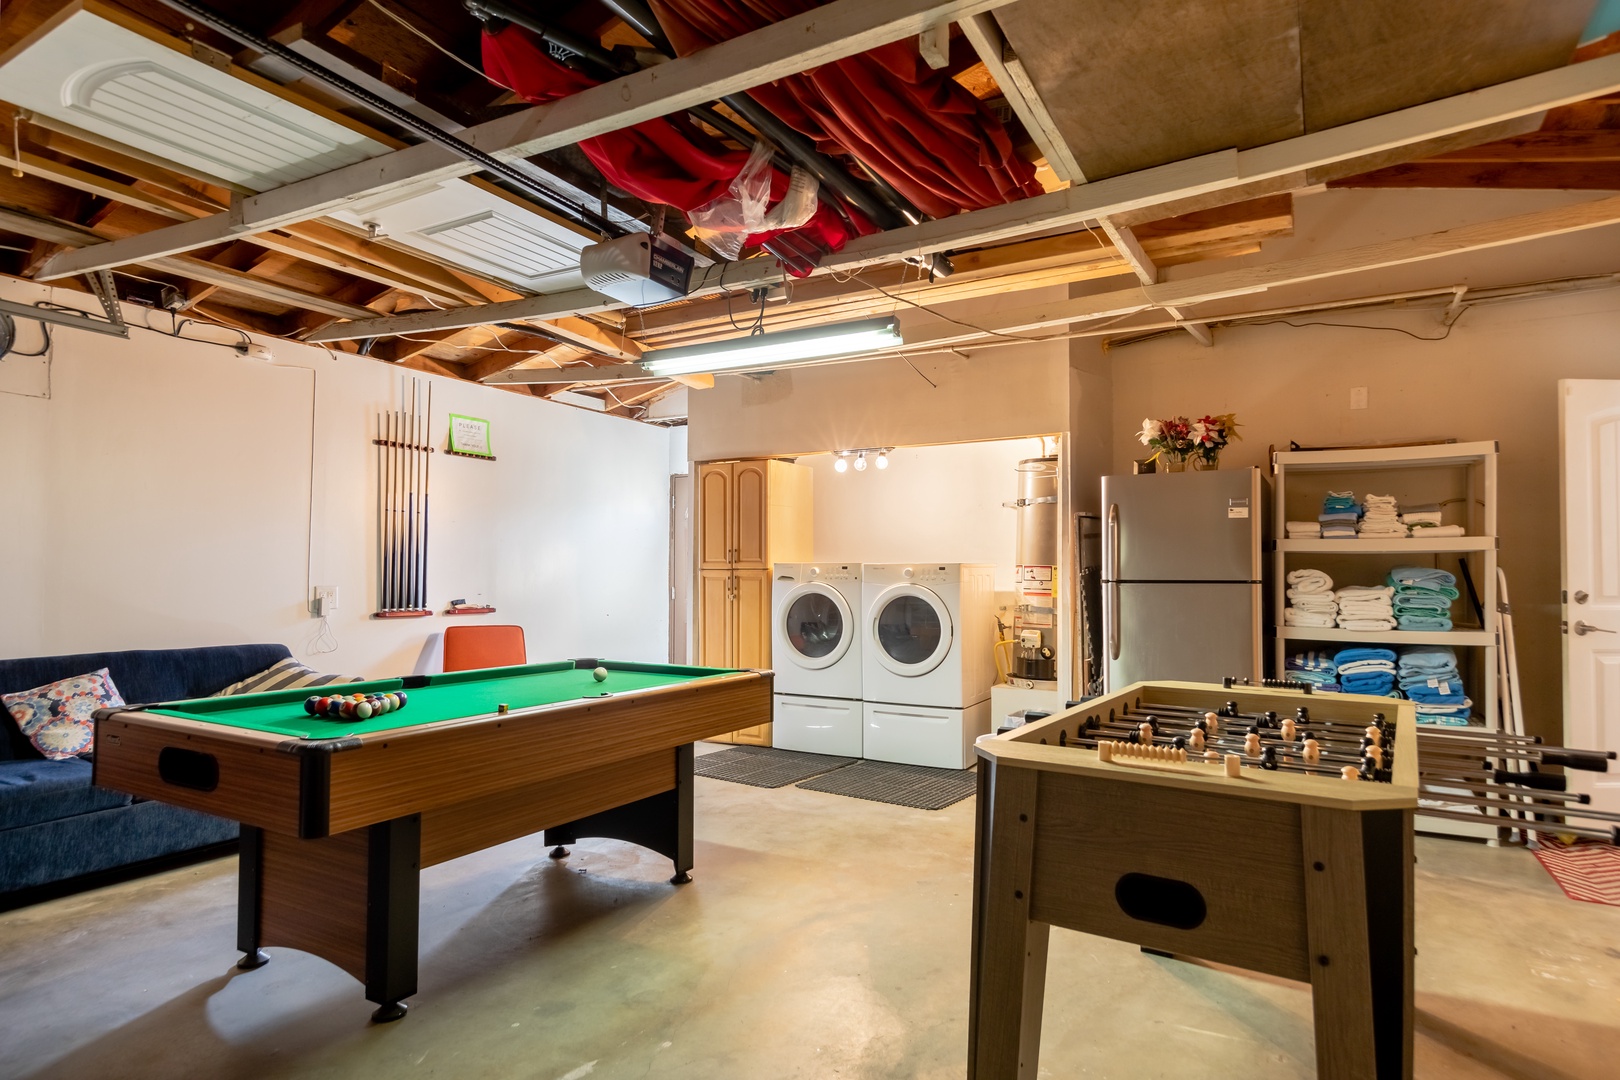 Game room and laundry area with washer/dryer